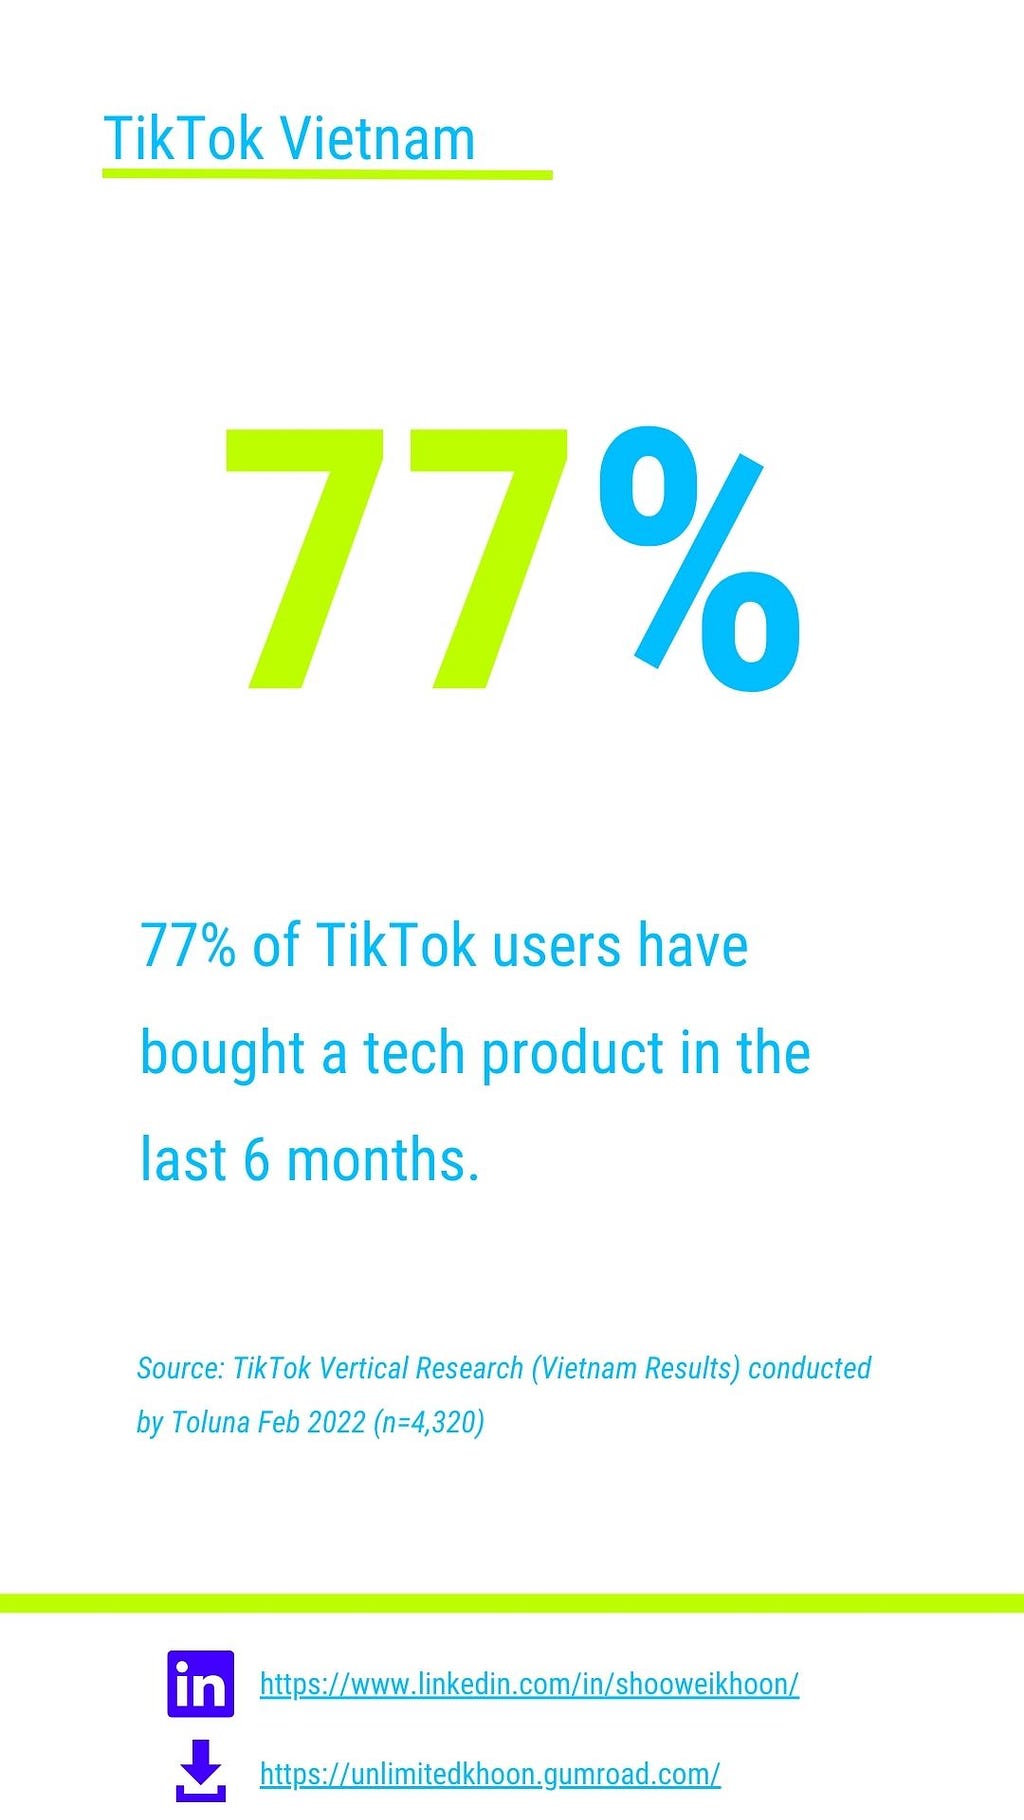 77% of VN TikTok users have bought a tech product in the last 6 months.